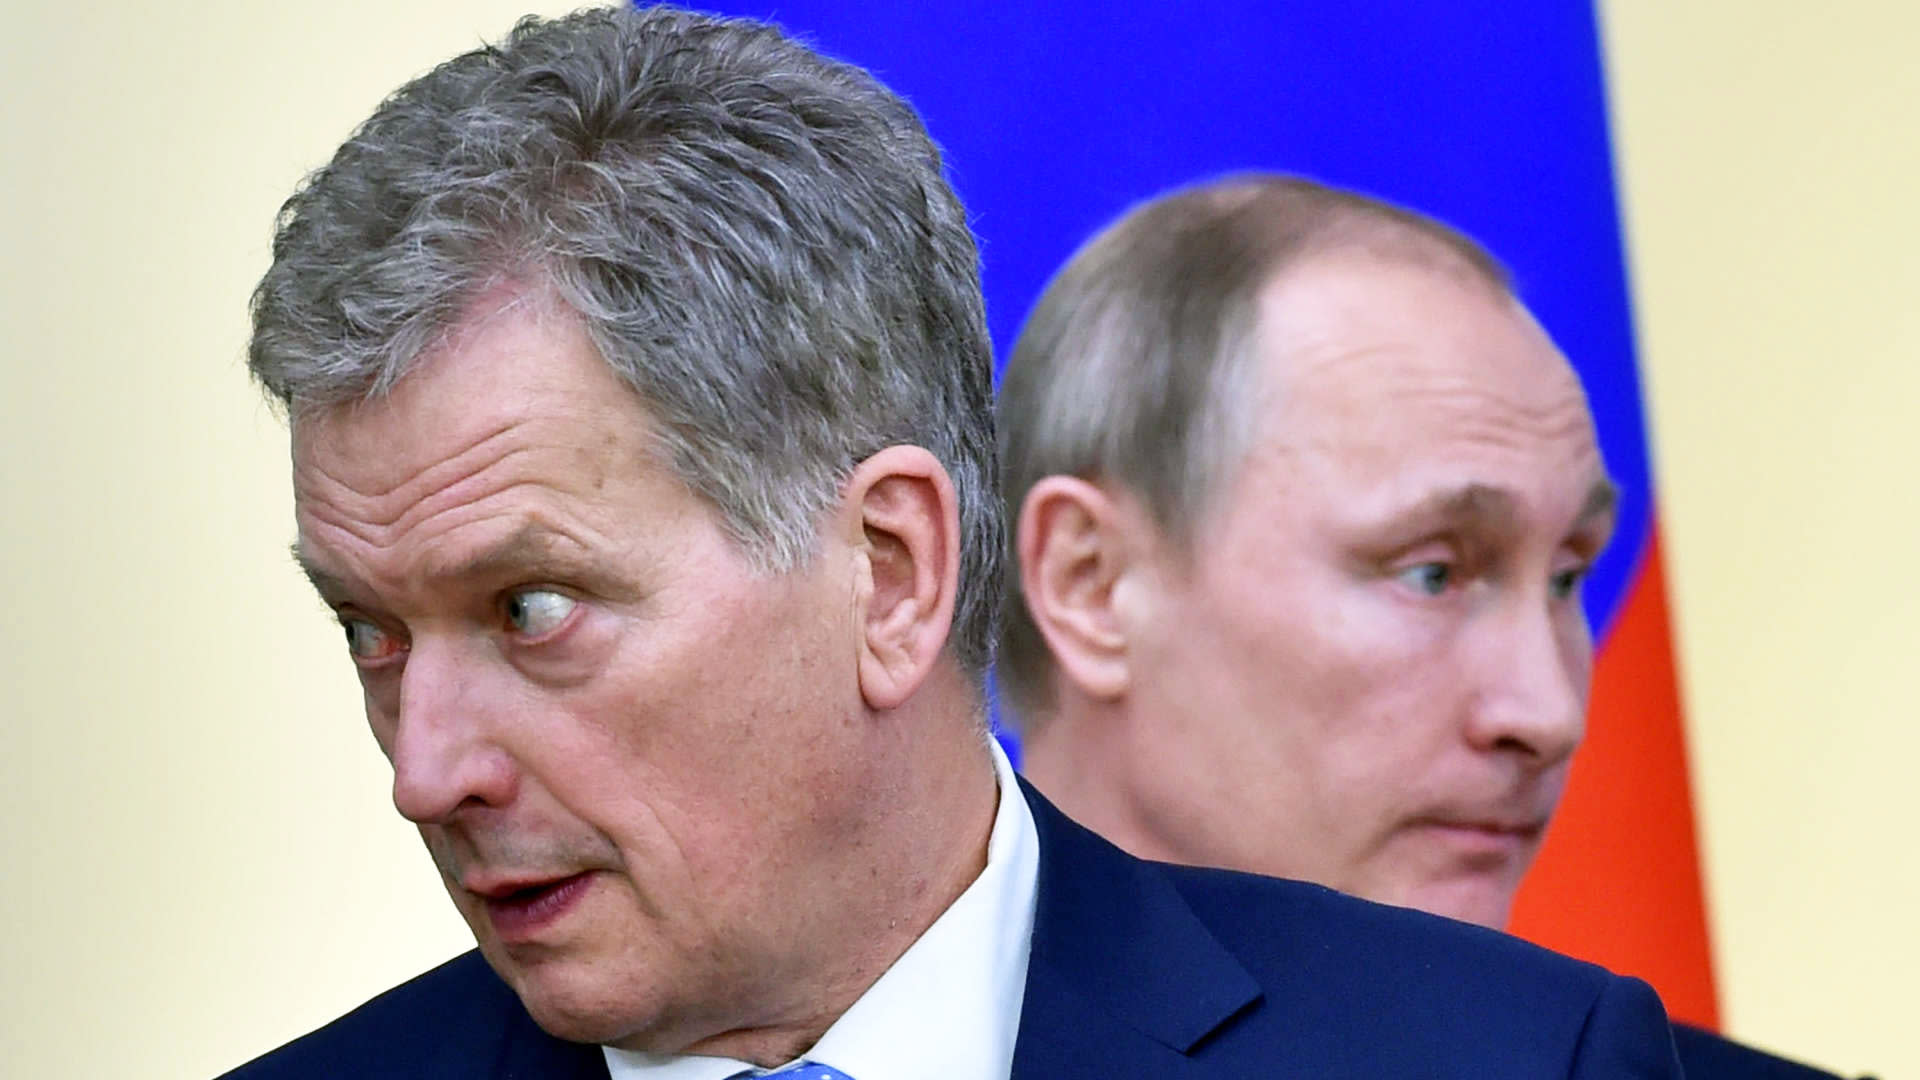 President Niinistö intends to call Putin and discuss the changed situation